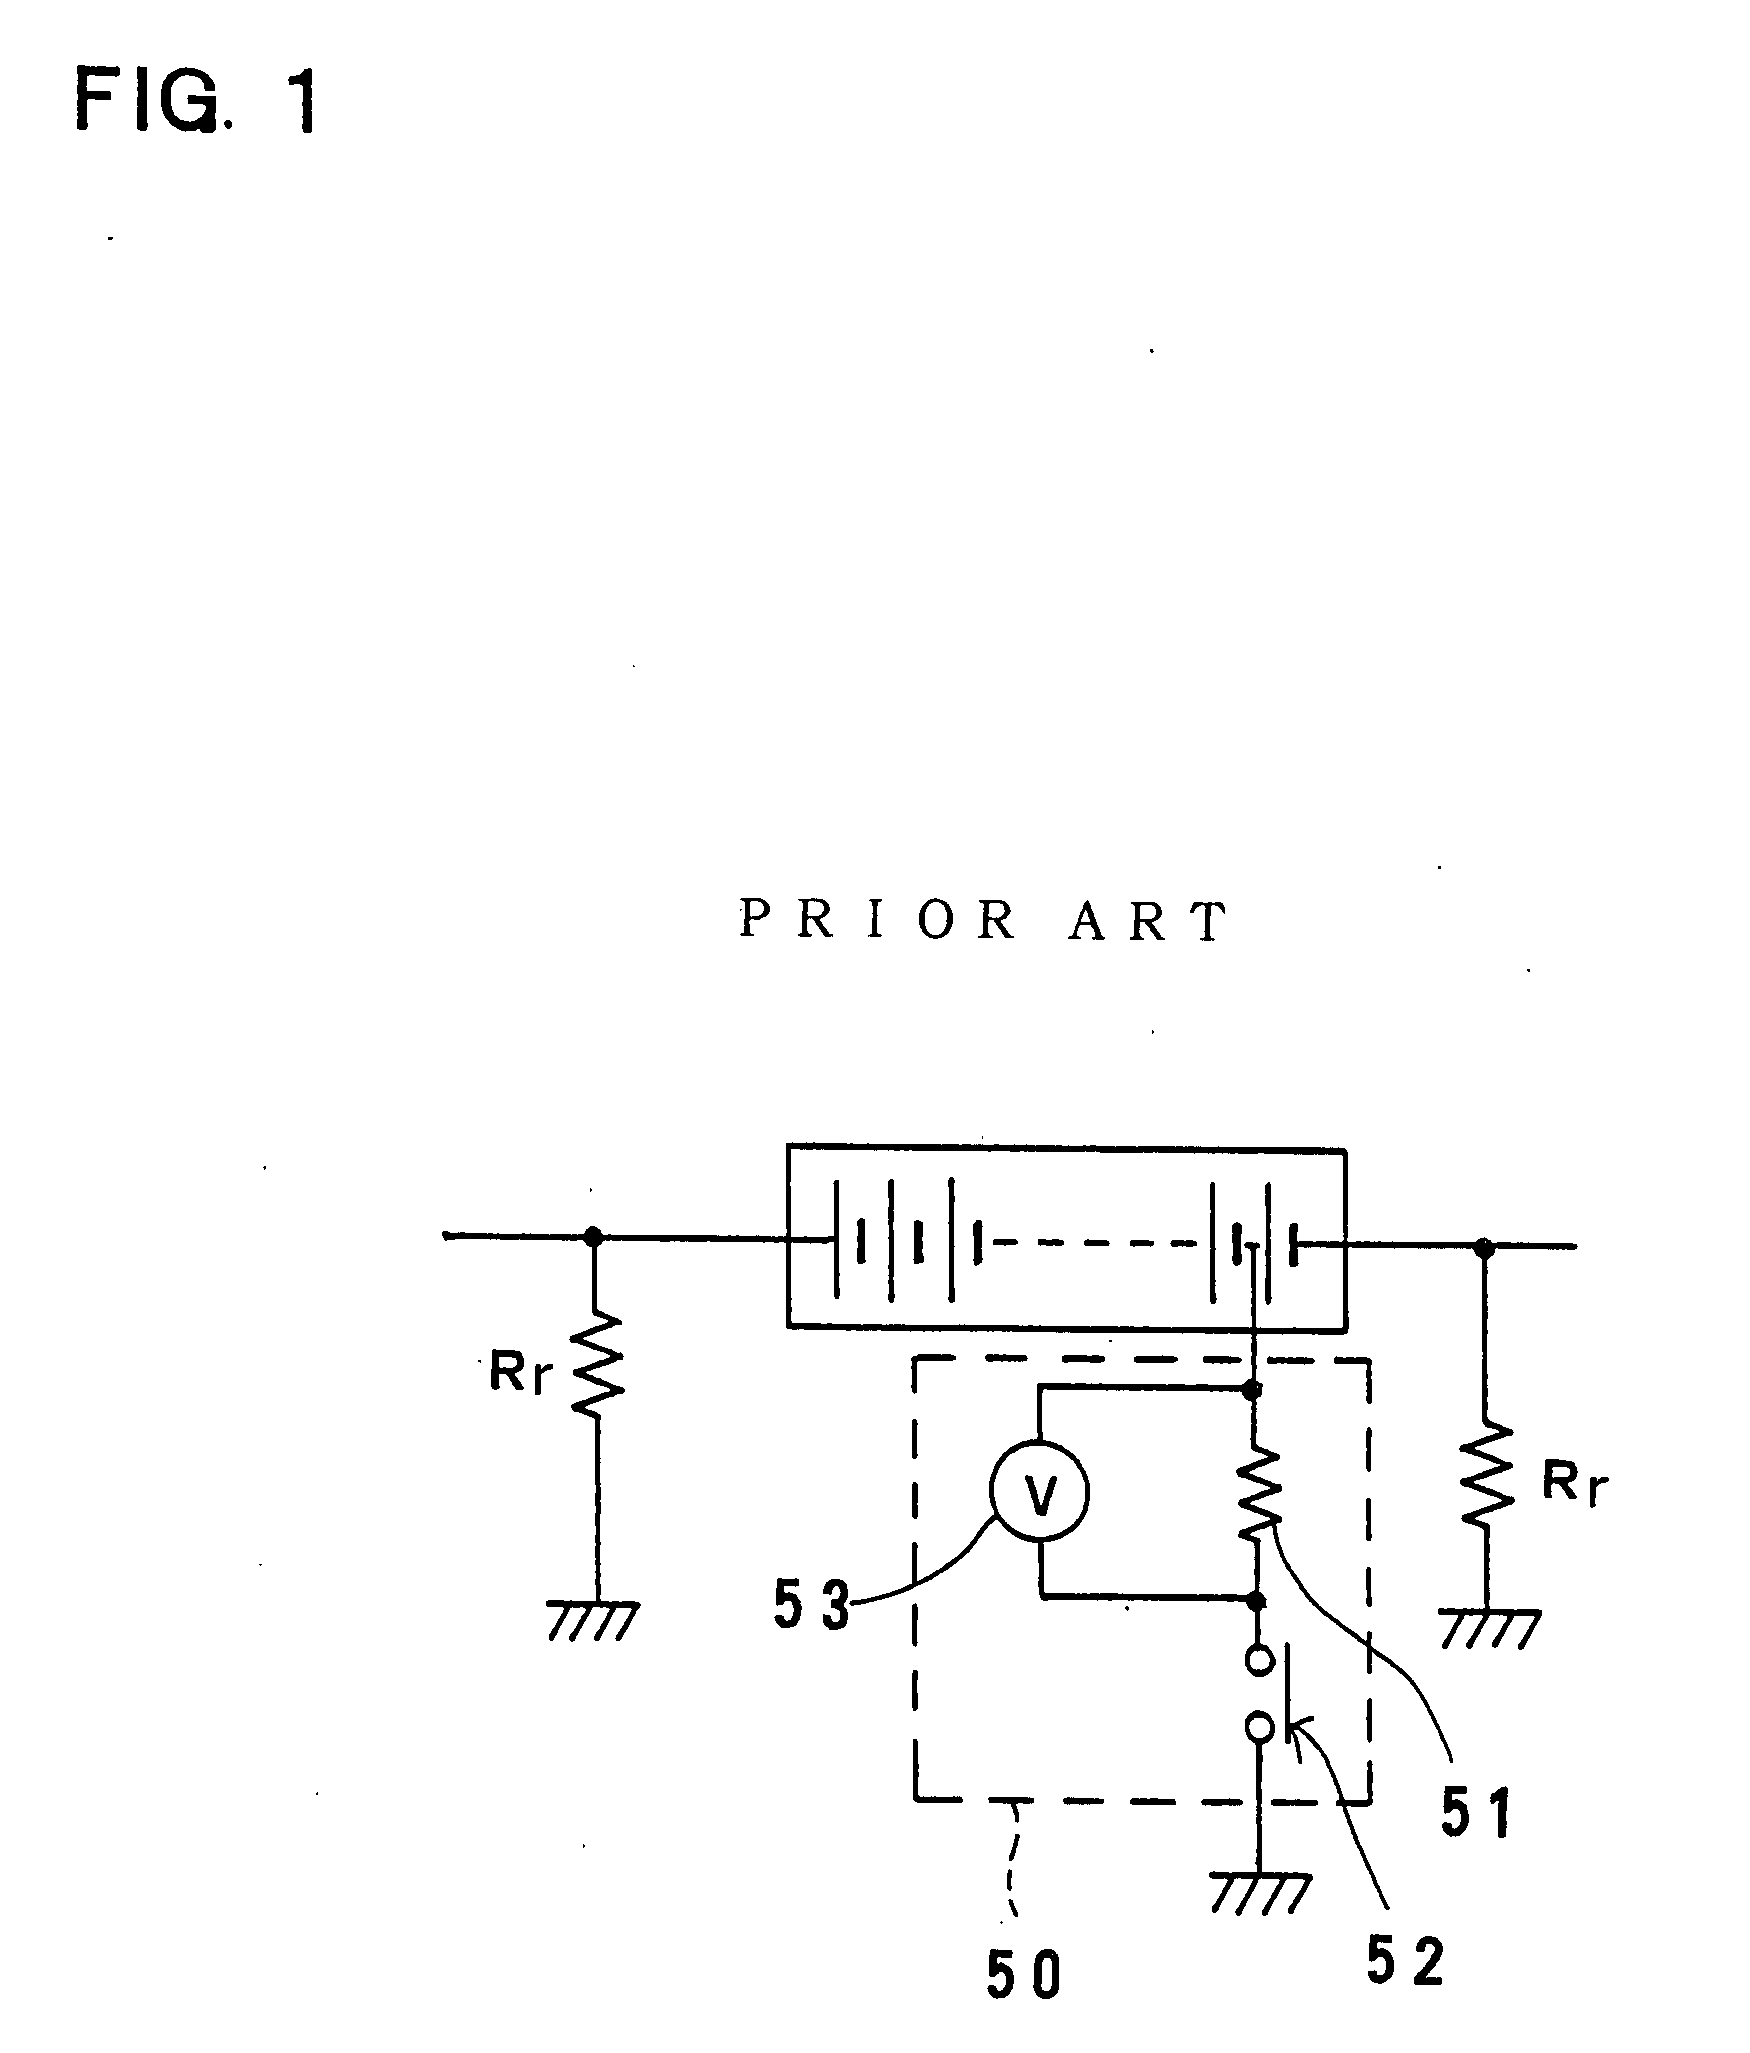 Leakage detection circuit for electric vehicle